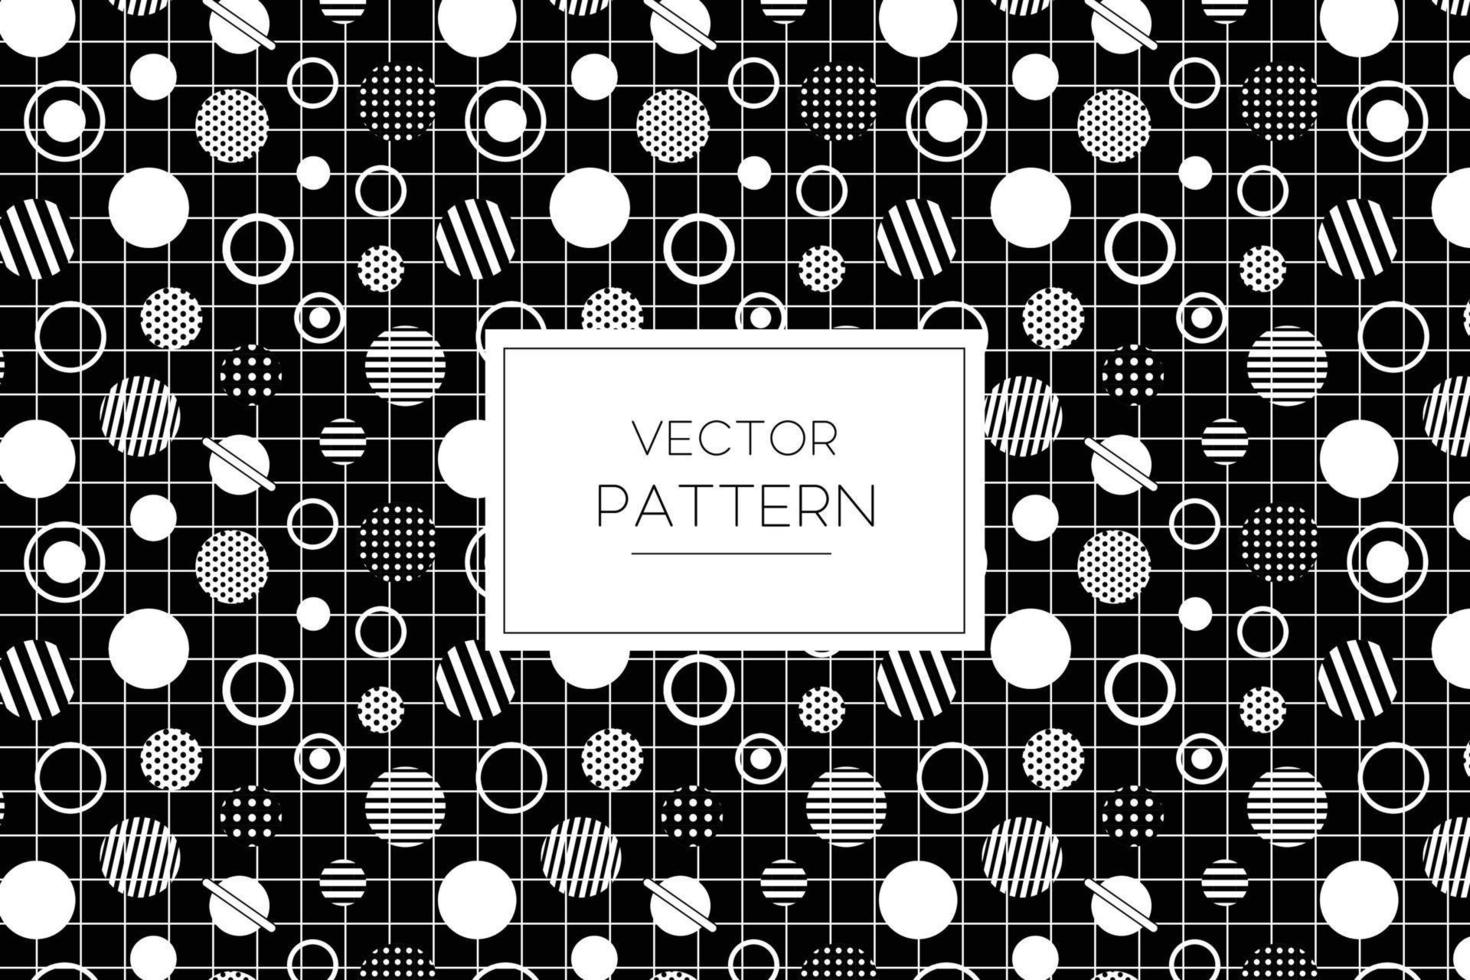 Geometric circles in different sizes with grid line seamless repeat pattern vector